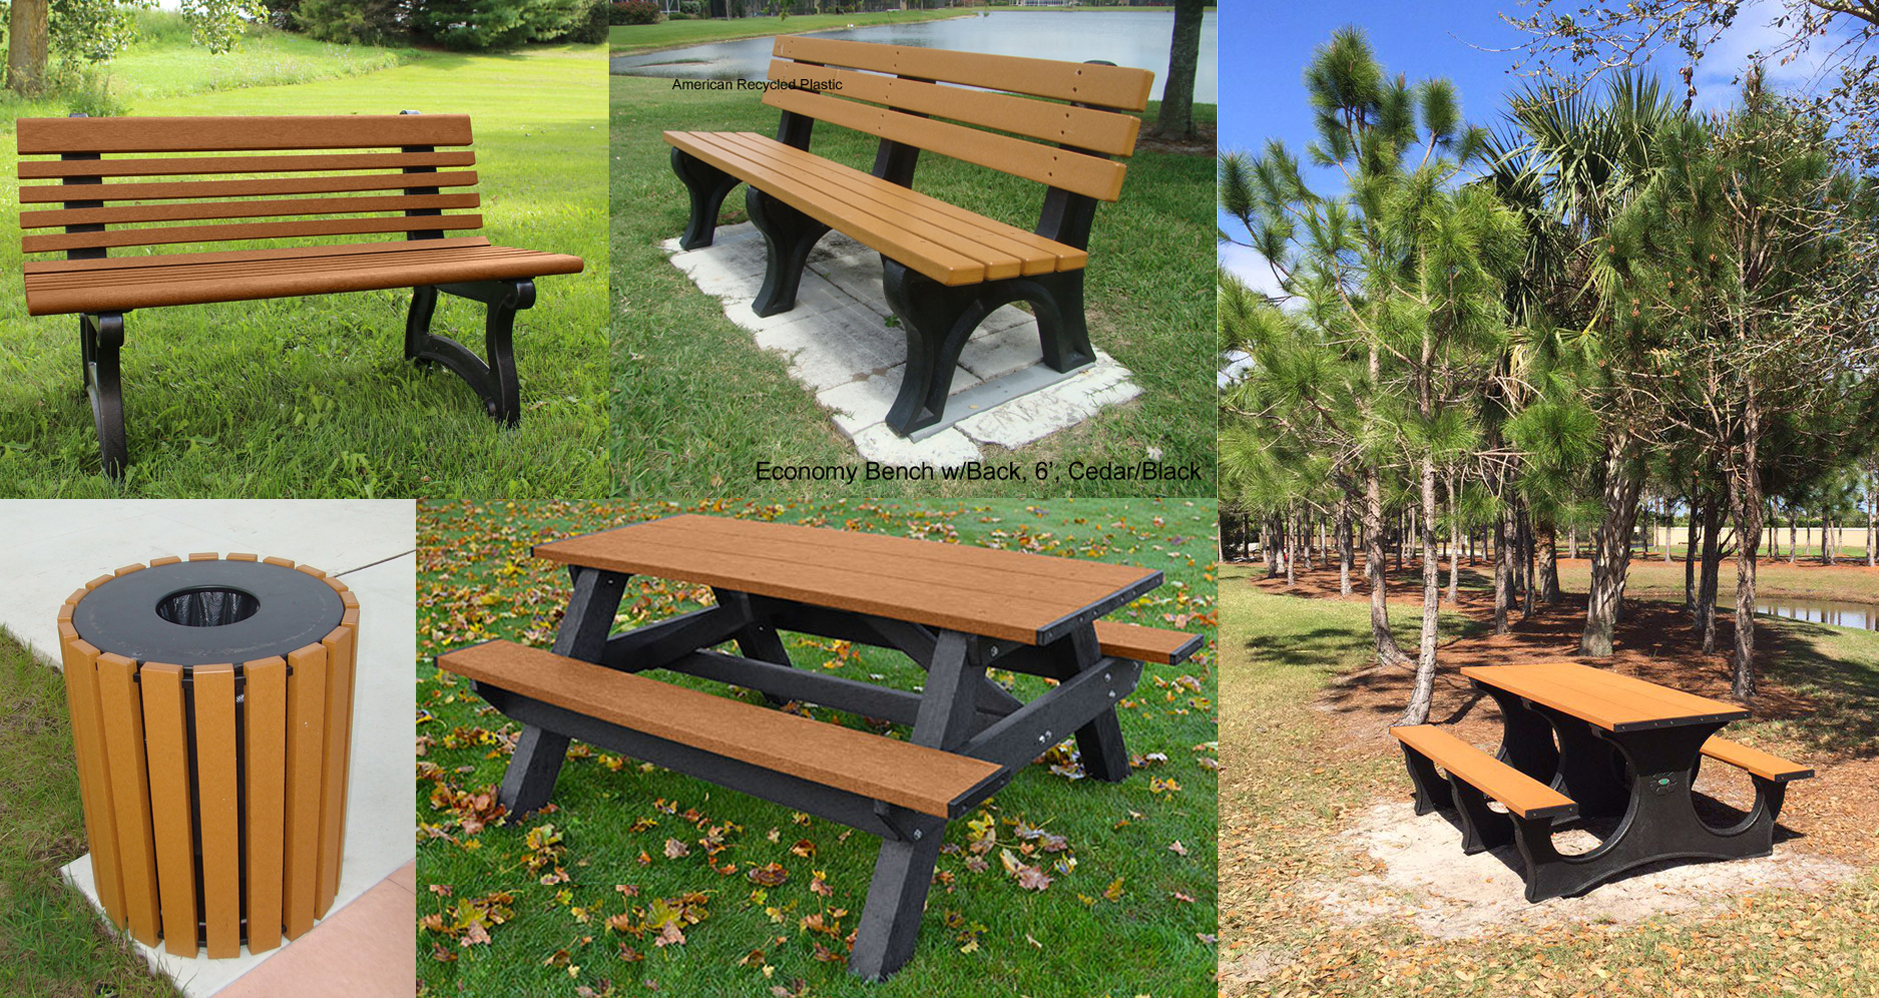 Bench Willow Economy Waste Receptacle Picnic Tables American Recycled Plastic